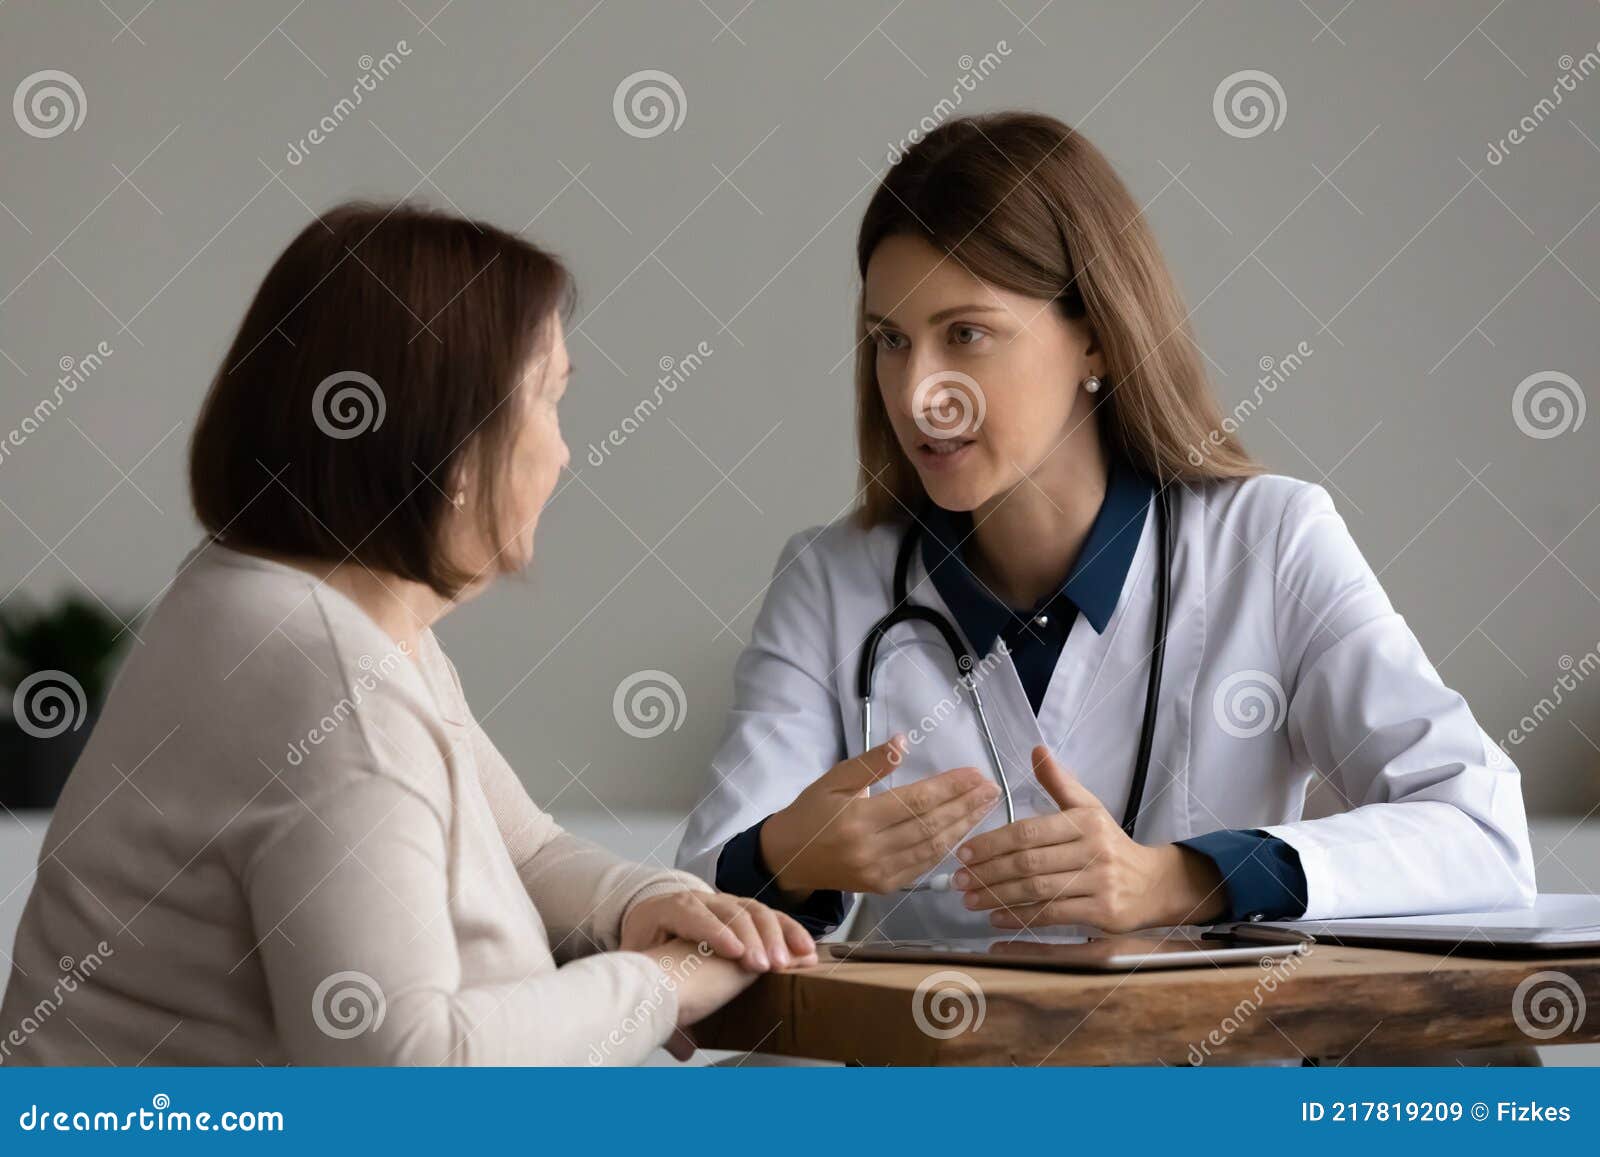 female doctor consult mature patient at clinic